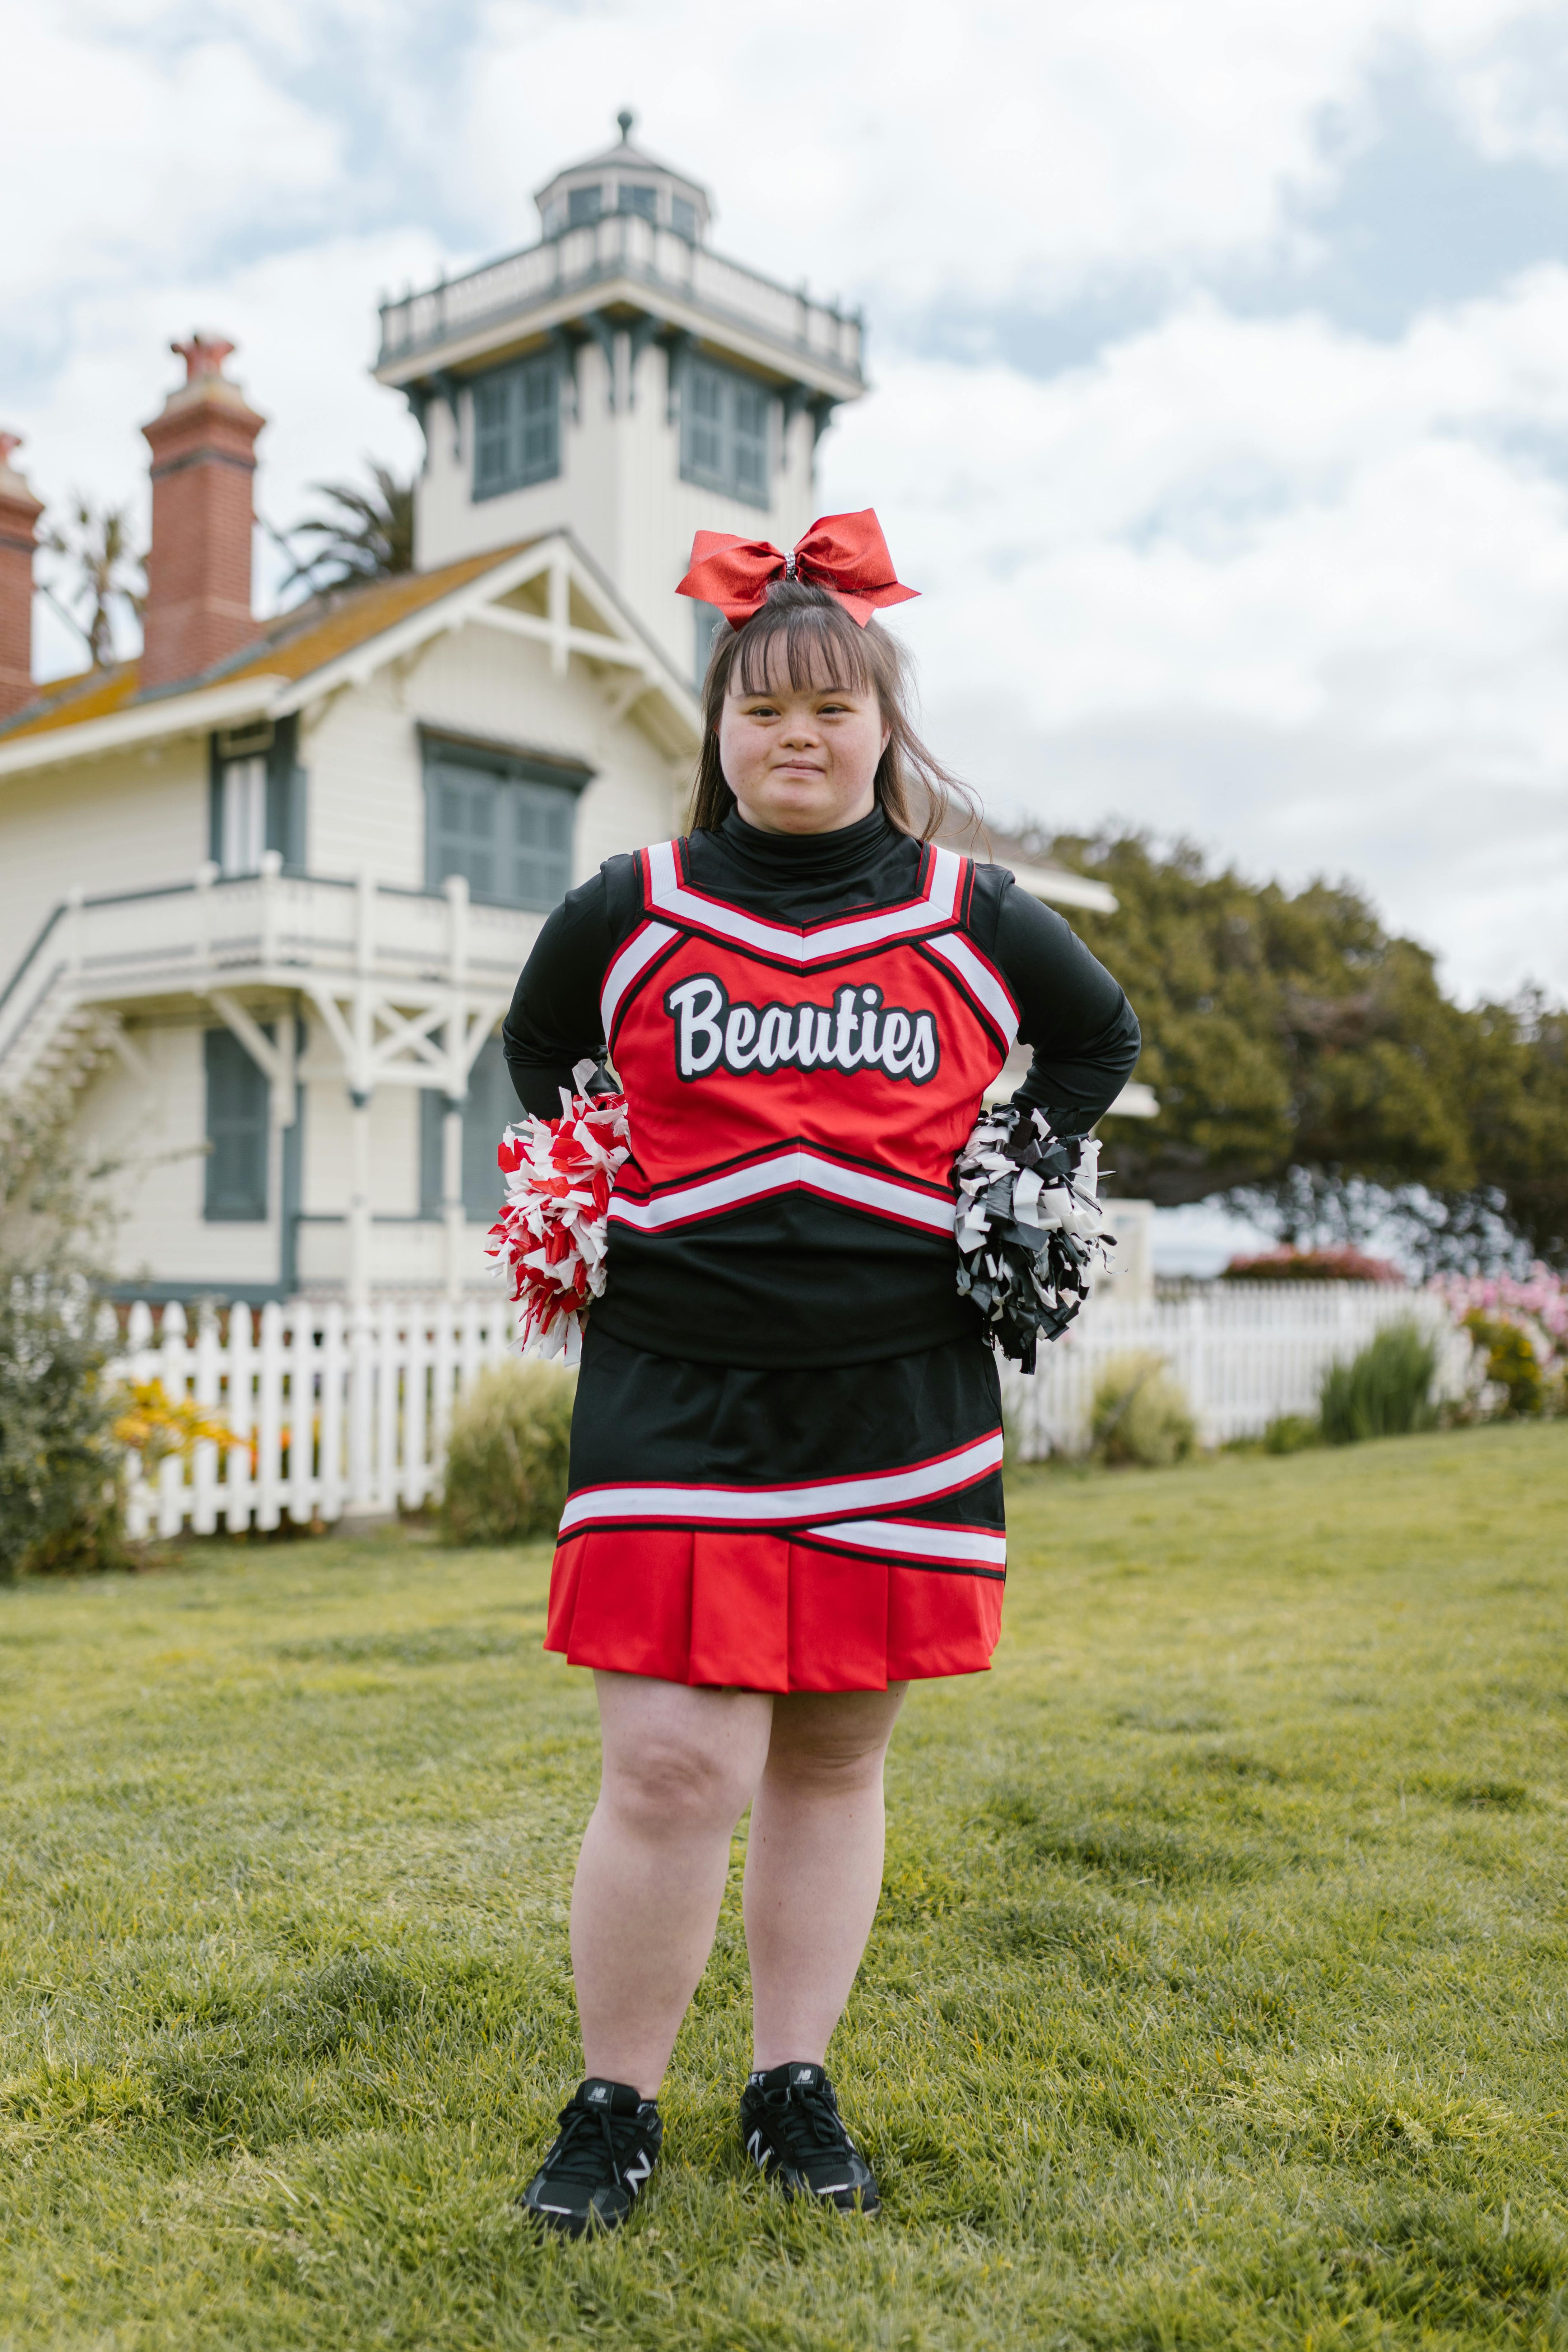 A Woman in Cheerleader Outfit Standing Outside · Free Stock Photo